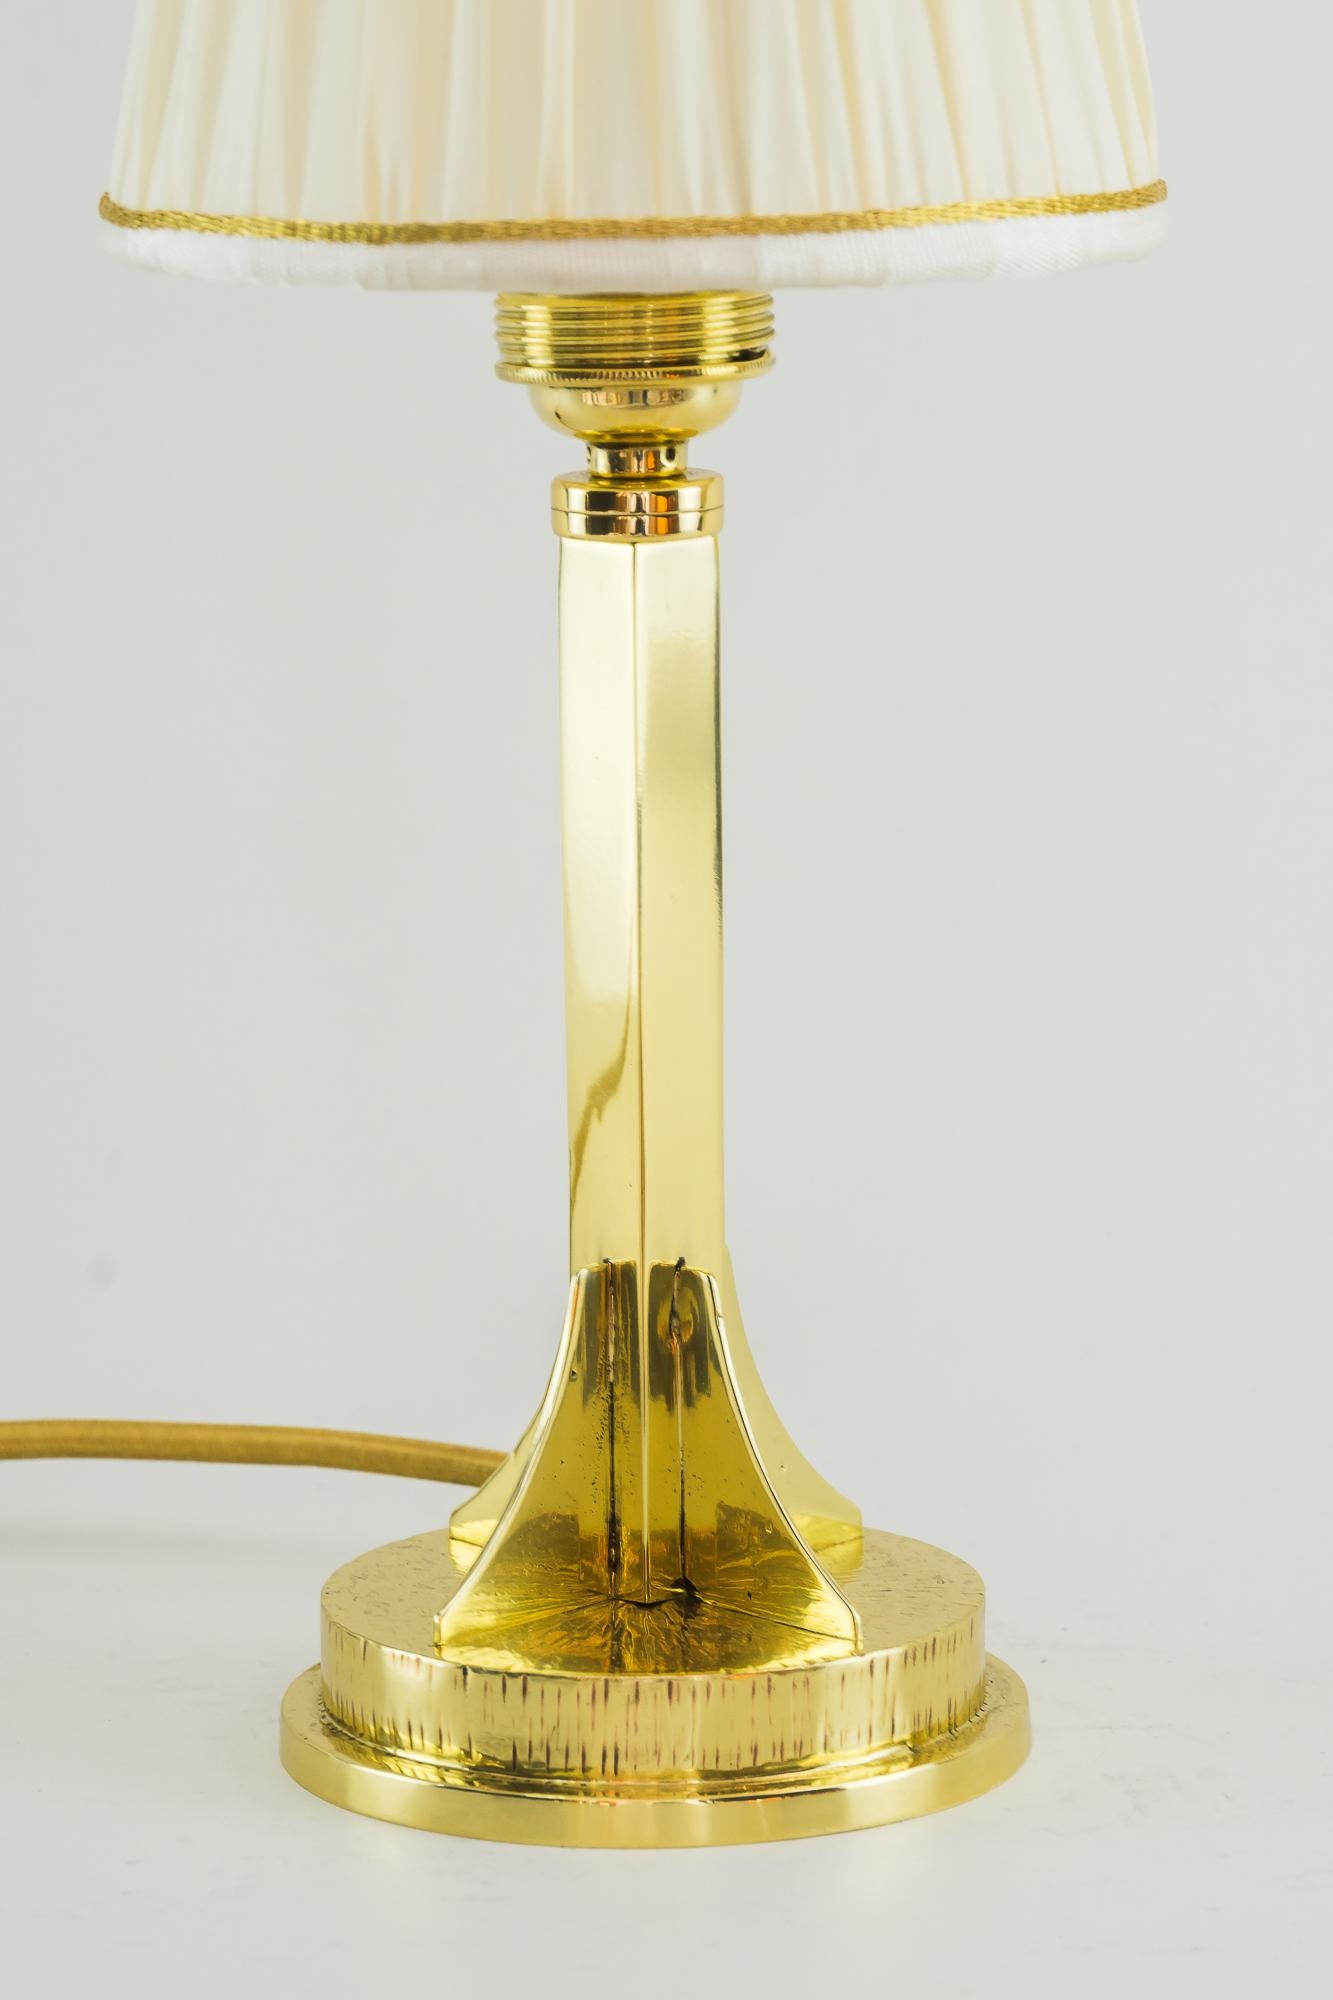 Art Deco table lamp, Vienna, circa 1920.
Brass Hammered
Polished and stove enameled
Shade replaced (new).